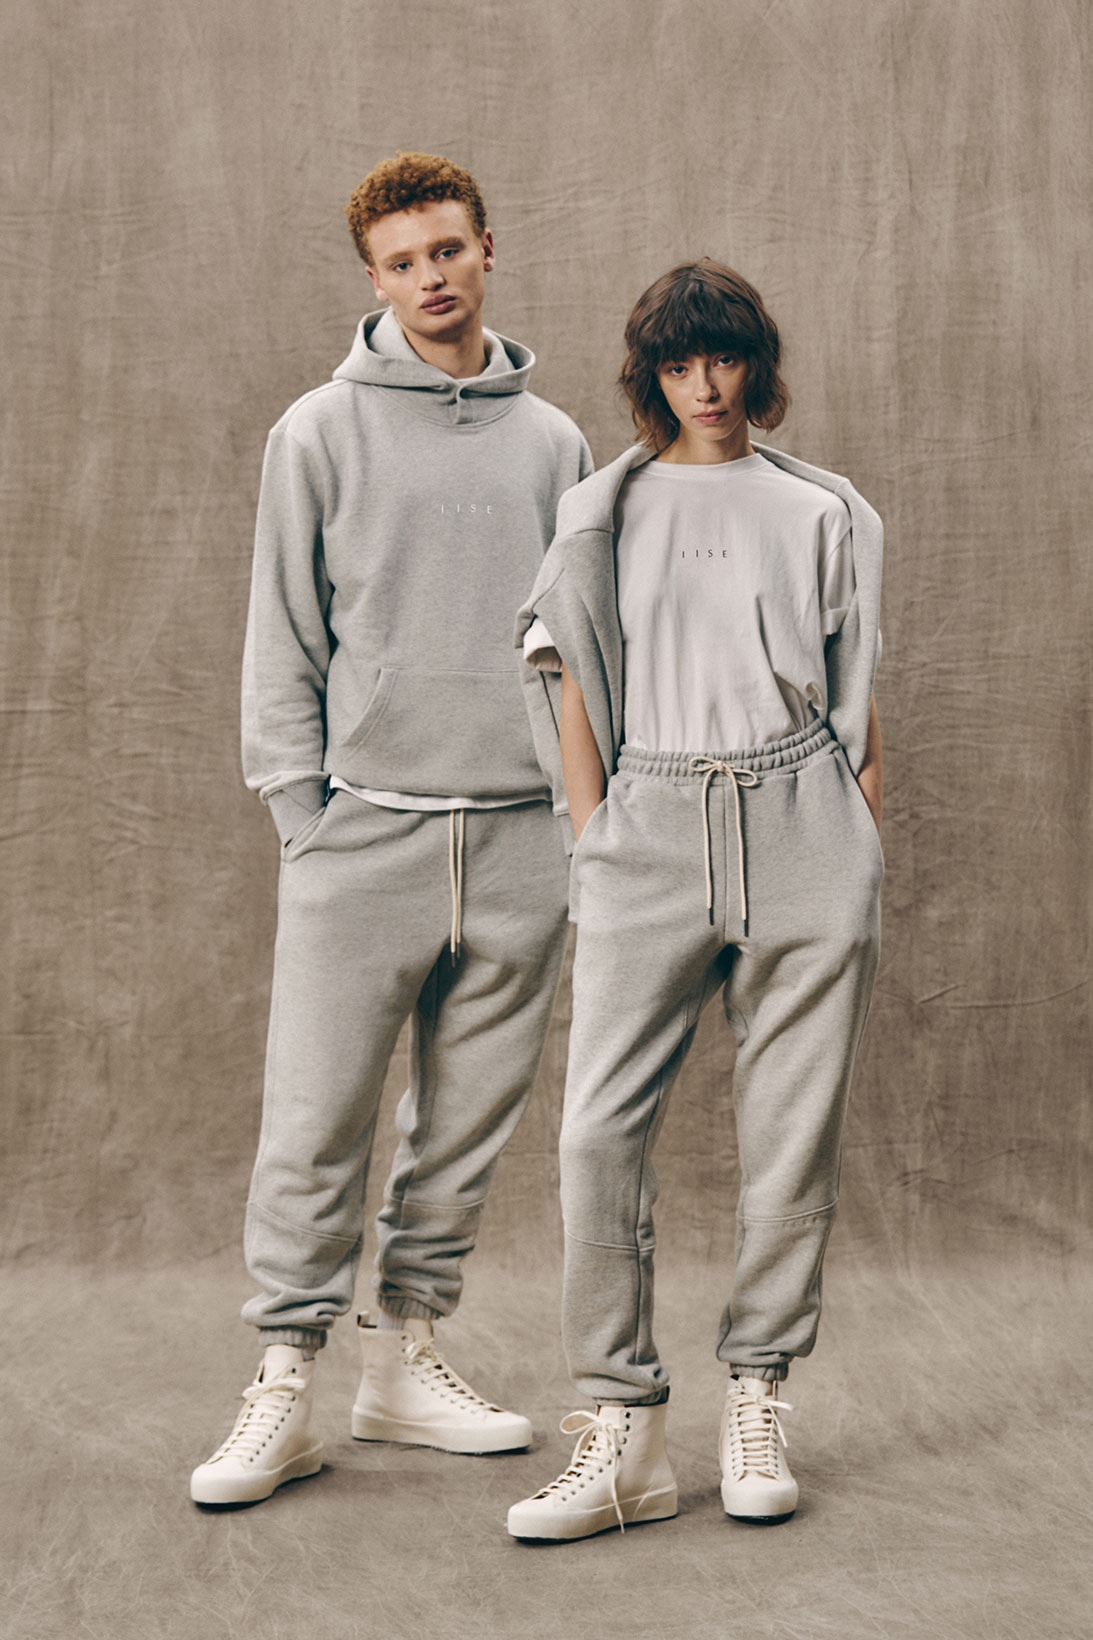 IISE Introduces Unisex Essential Sweats for FW20